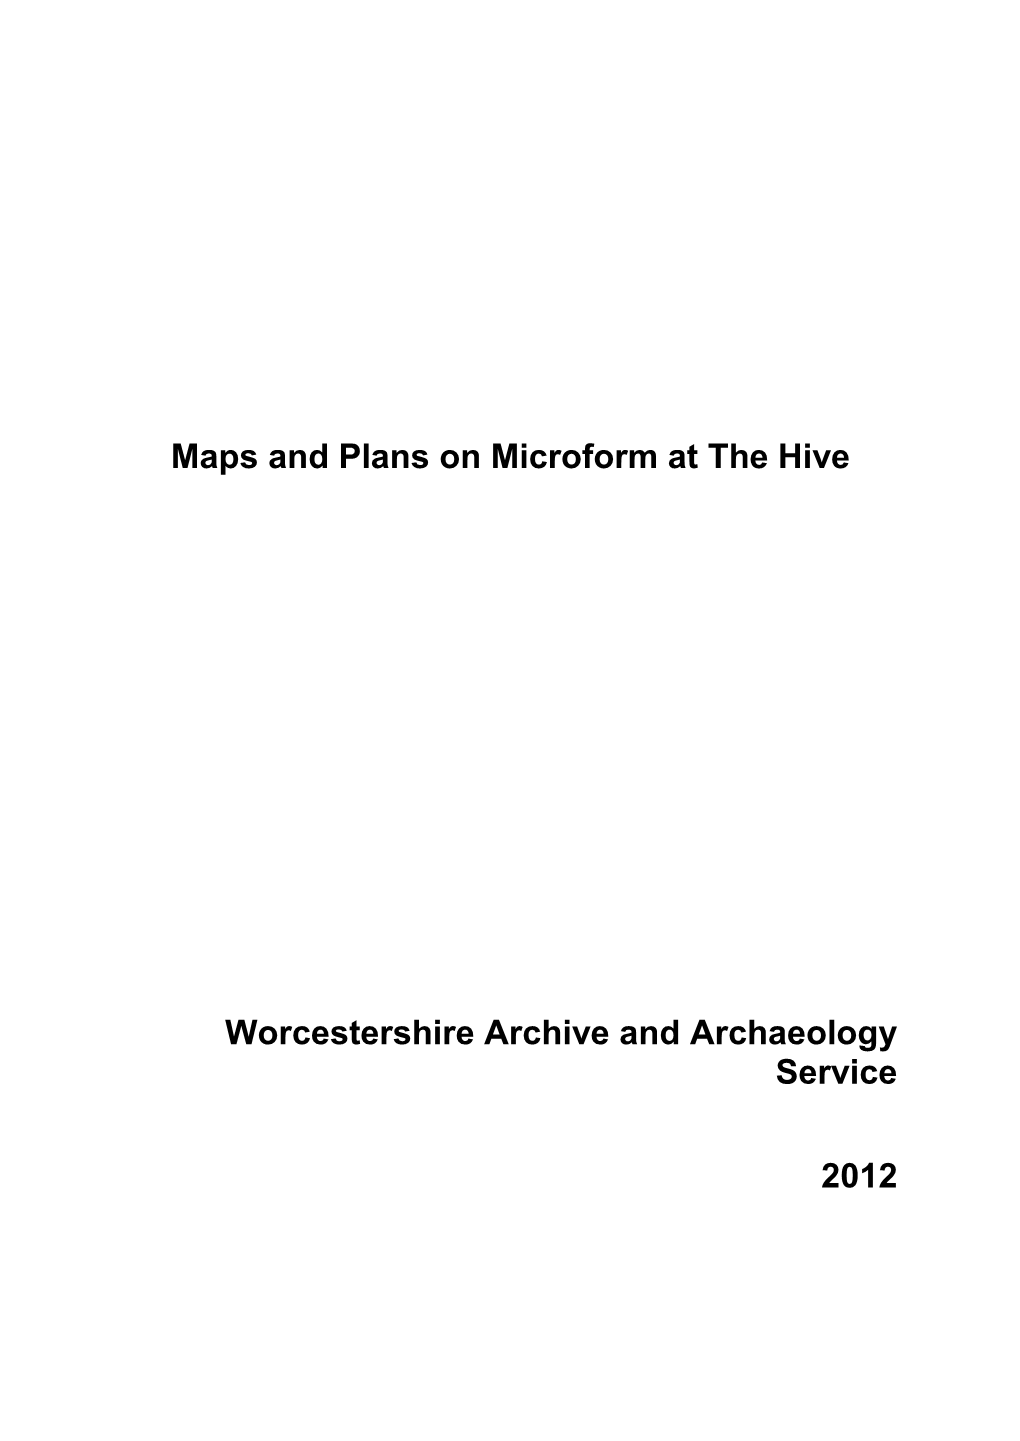 Maps and Plans on Microform at the Hive Worcestershire Archive And